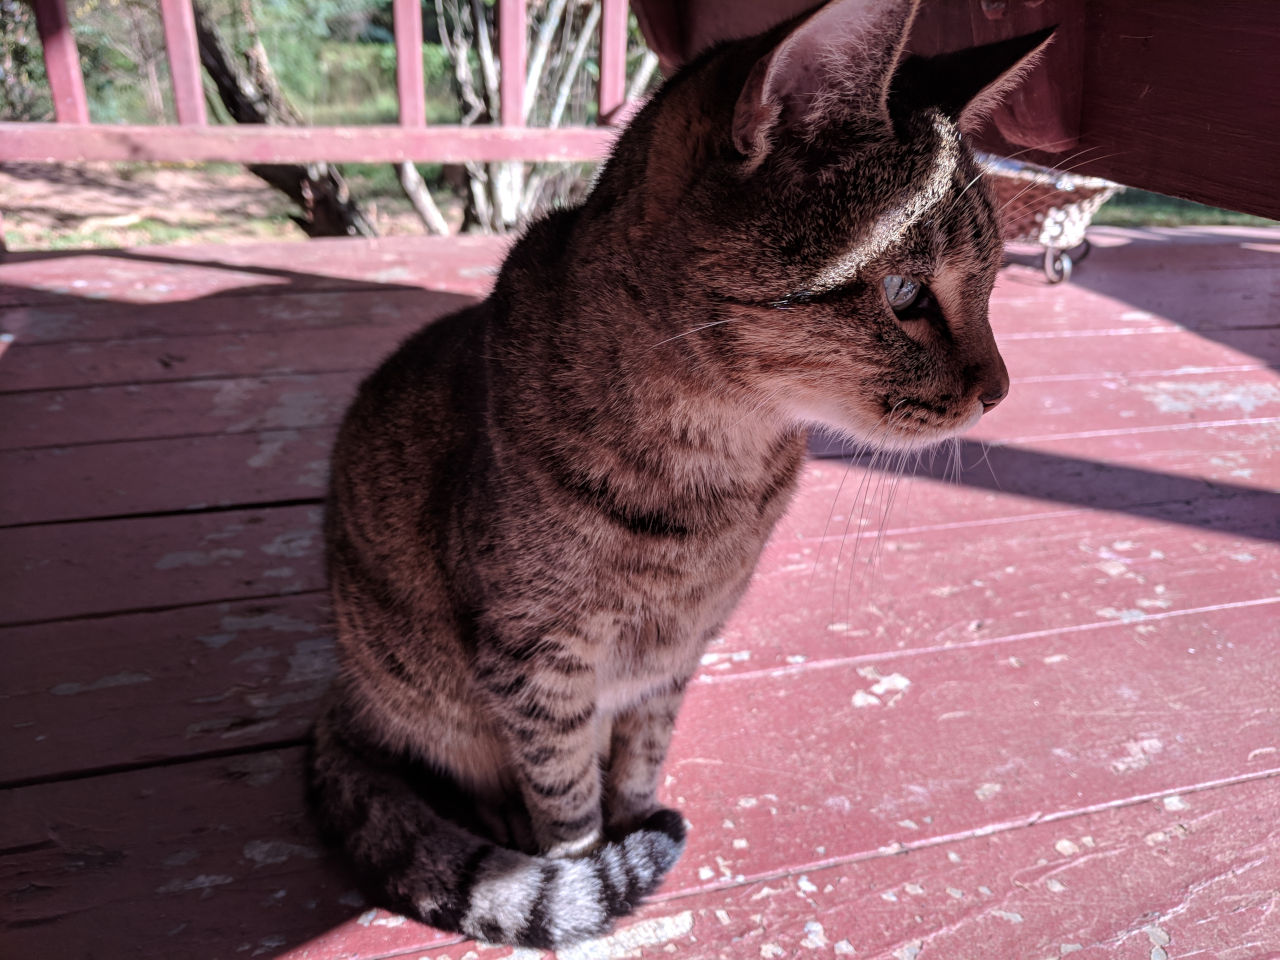 Smeagle, an old tabby cat, sitting in the shady part of a porch.